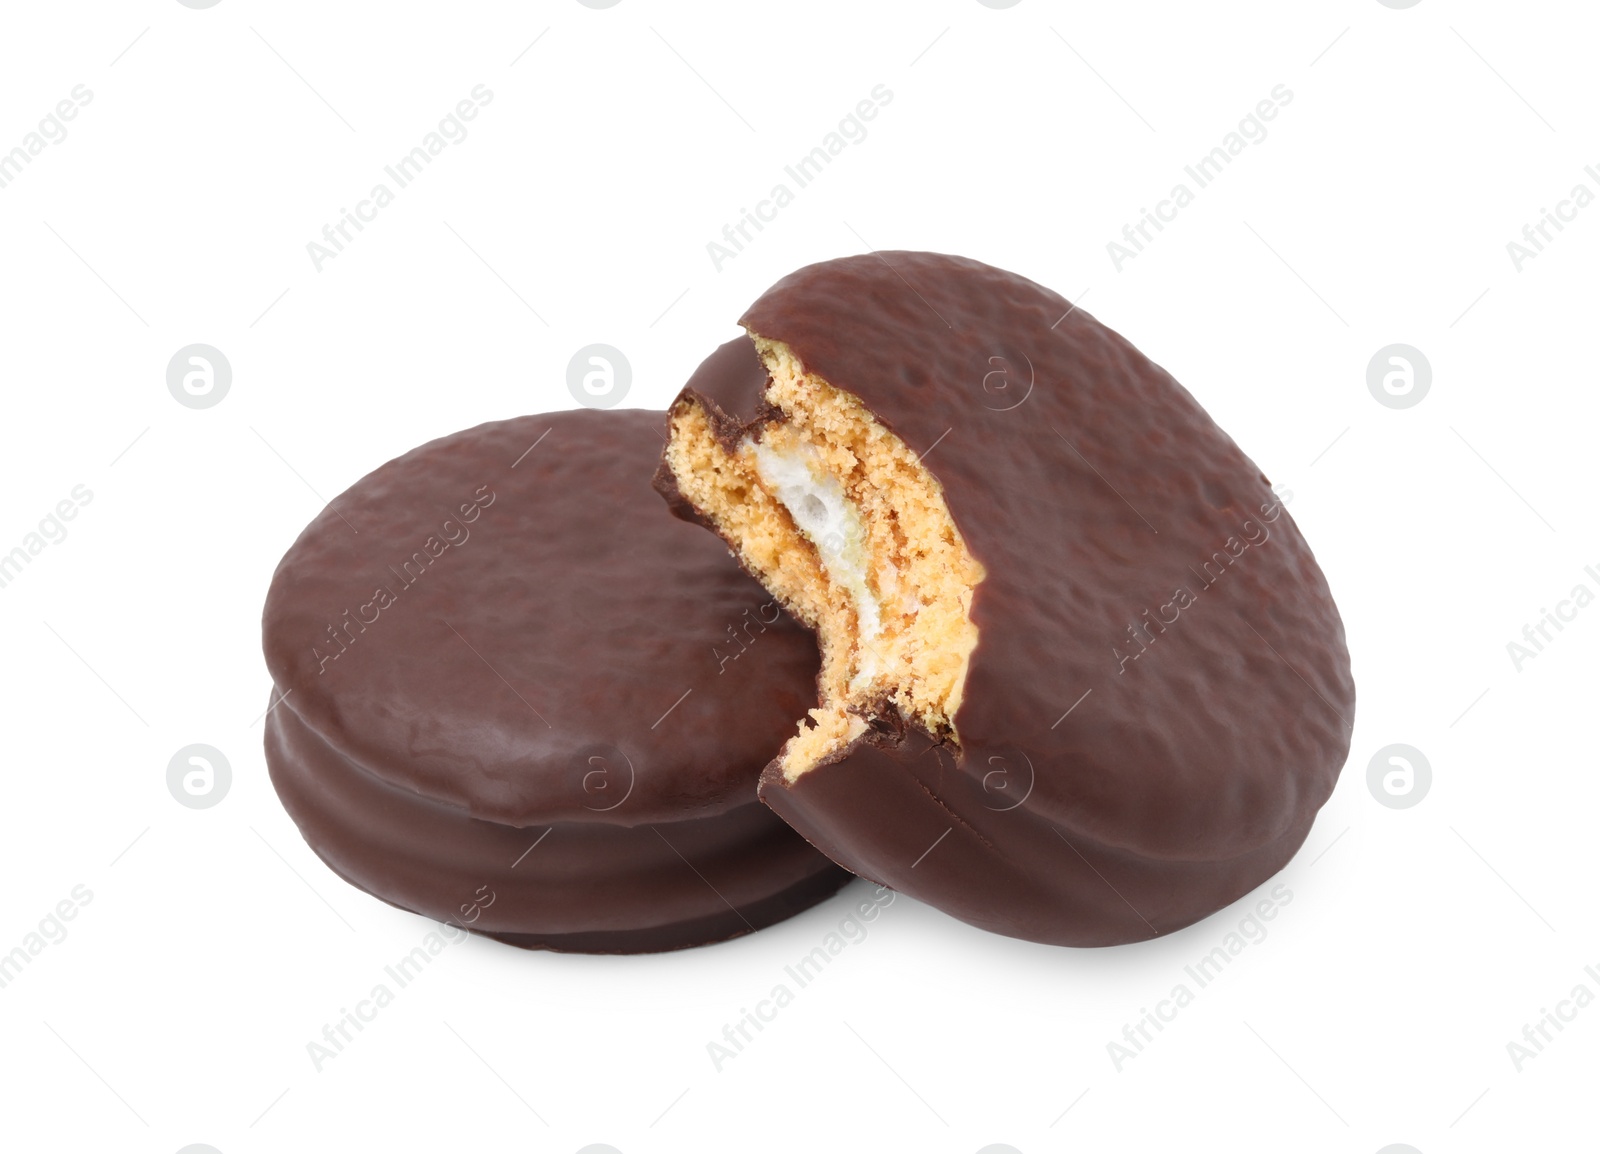 Photo of Two tasty choco pies isolated on white